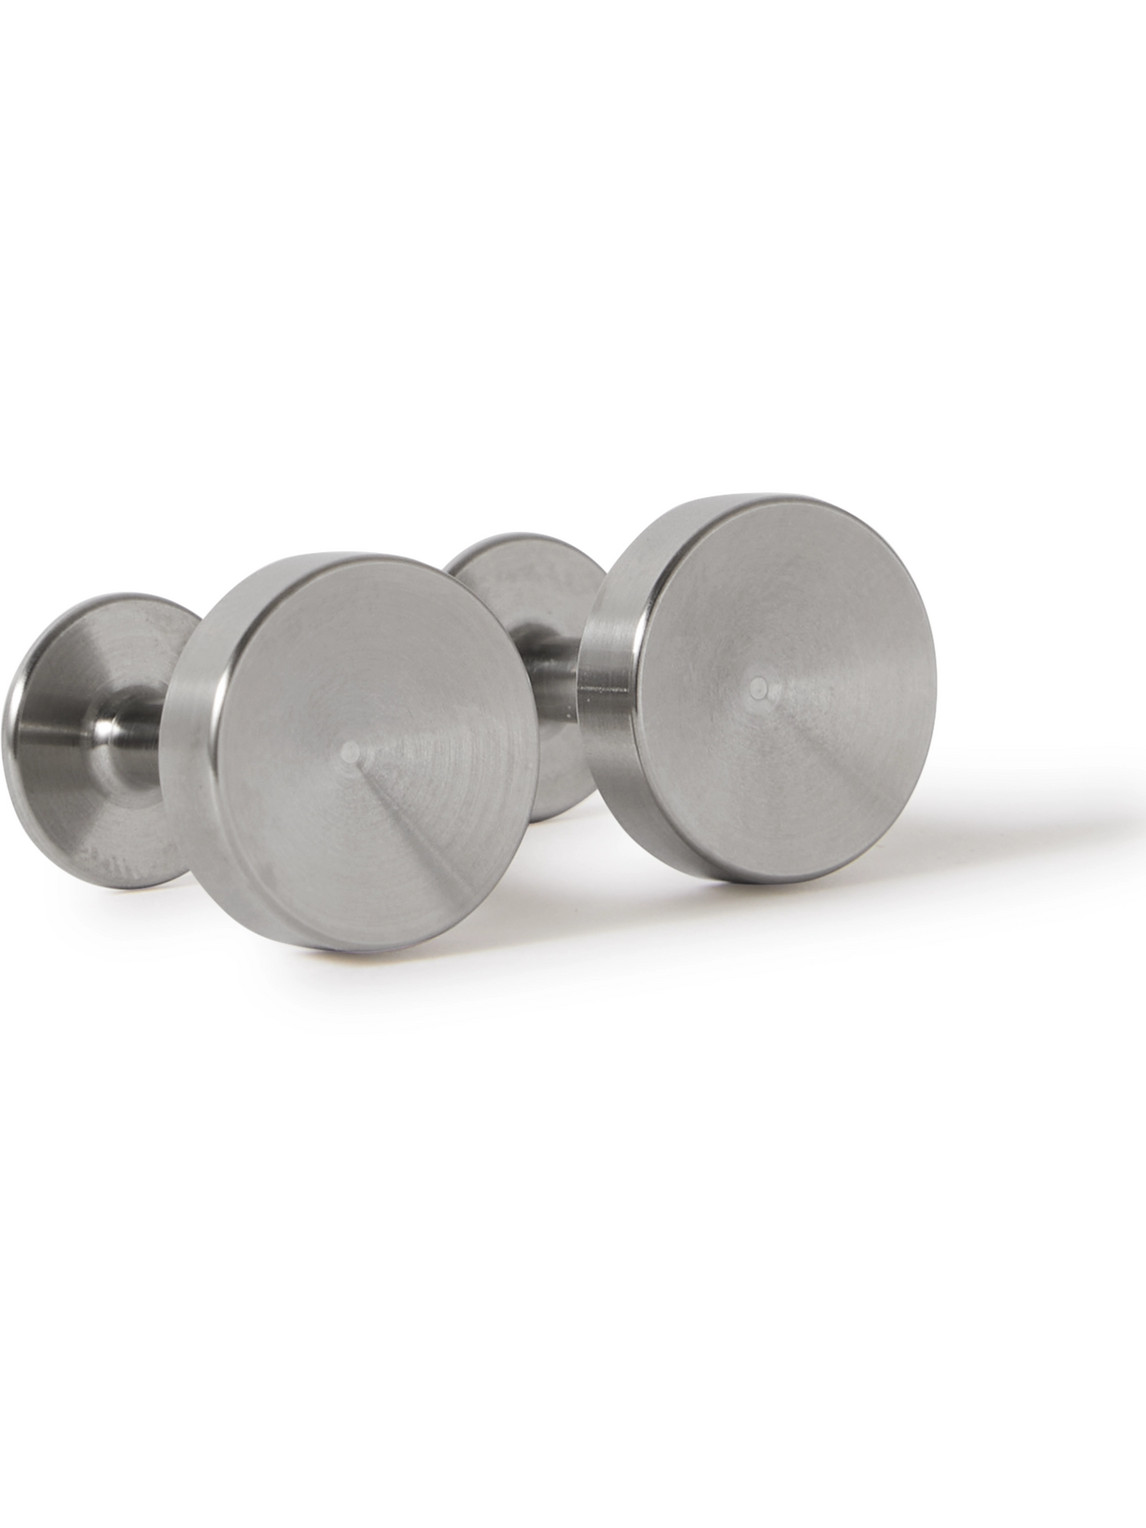 Alice Made This Alexander Stainless Steel Cufflinks In Silver